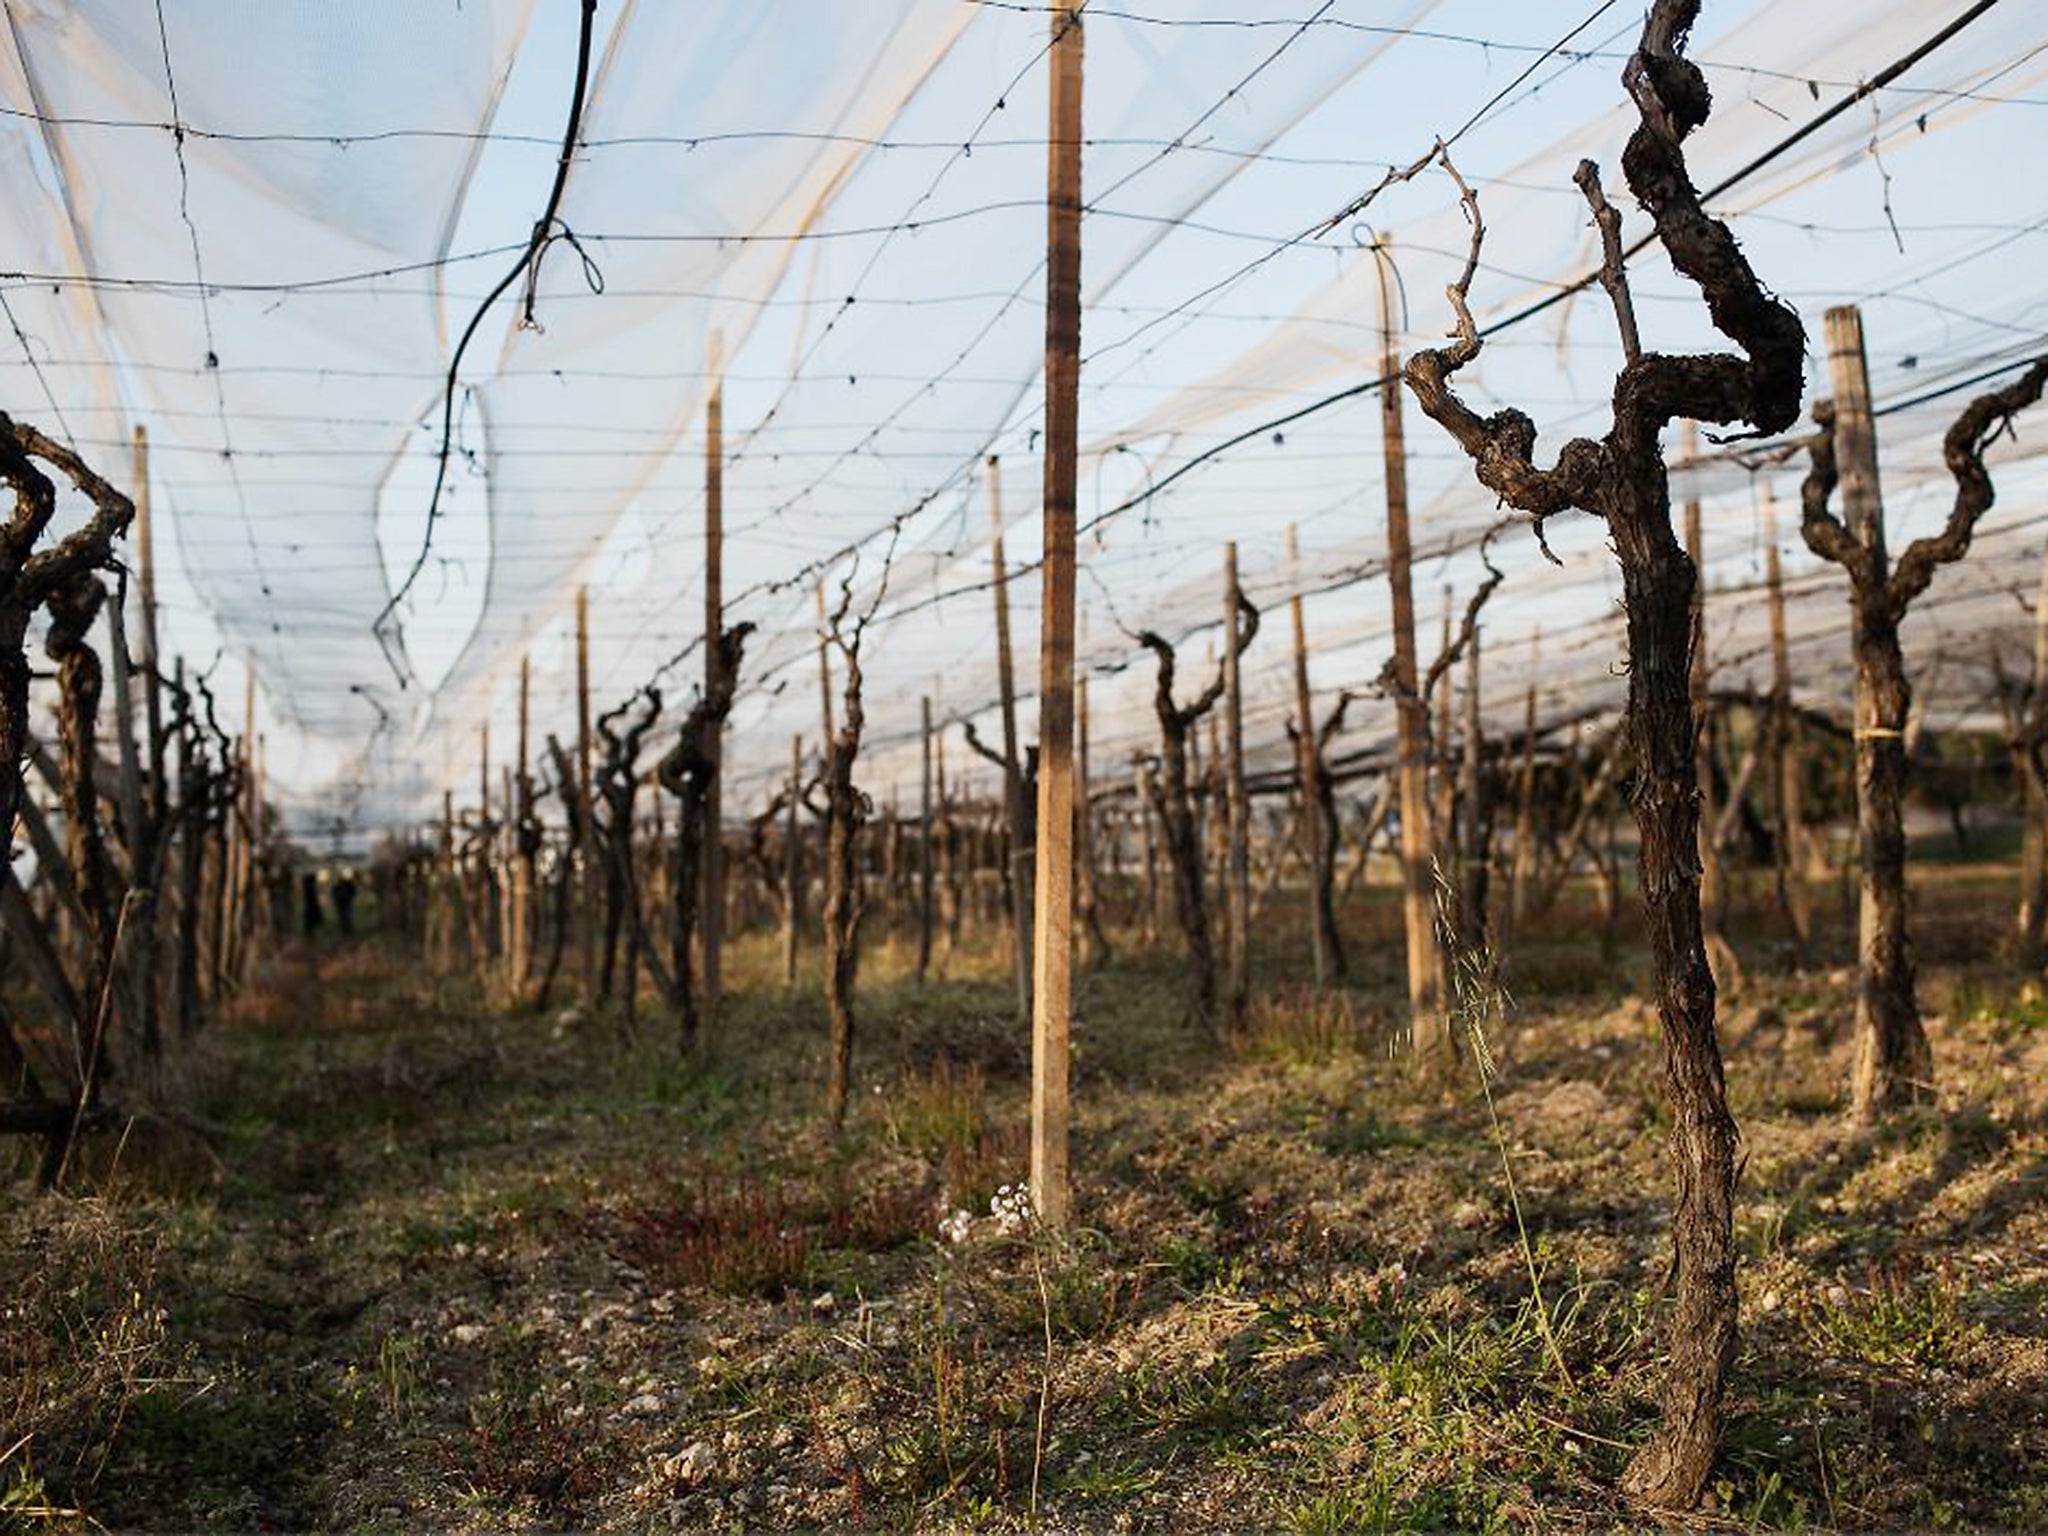 A vineyard during the off season in San Giorgio Ionico, Italy. The death of a vineyard worker prompted Italian legislators to take action, but exploitation is still disturbingly widespread